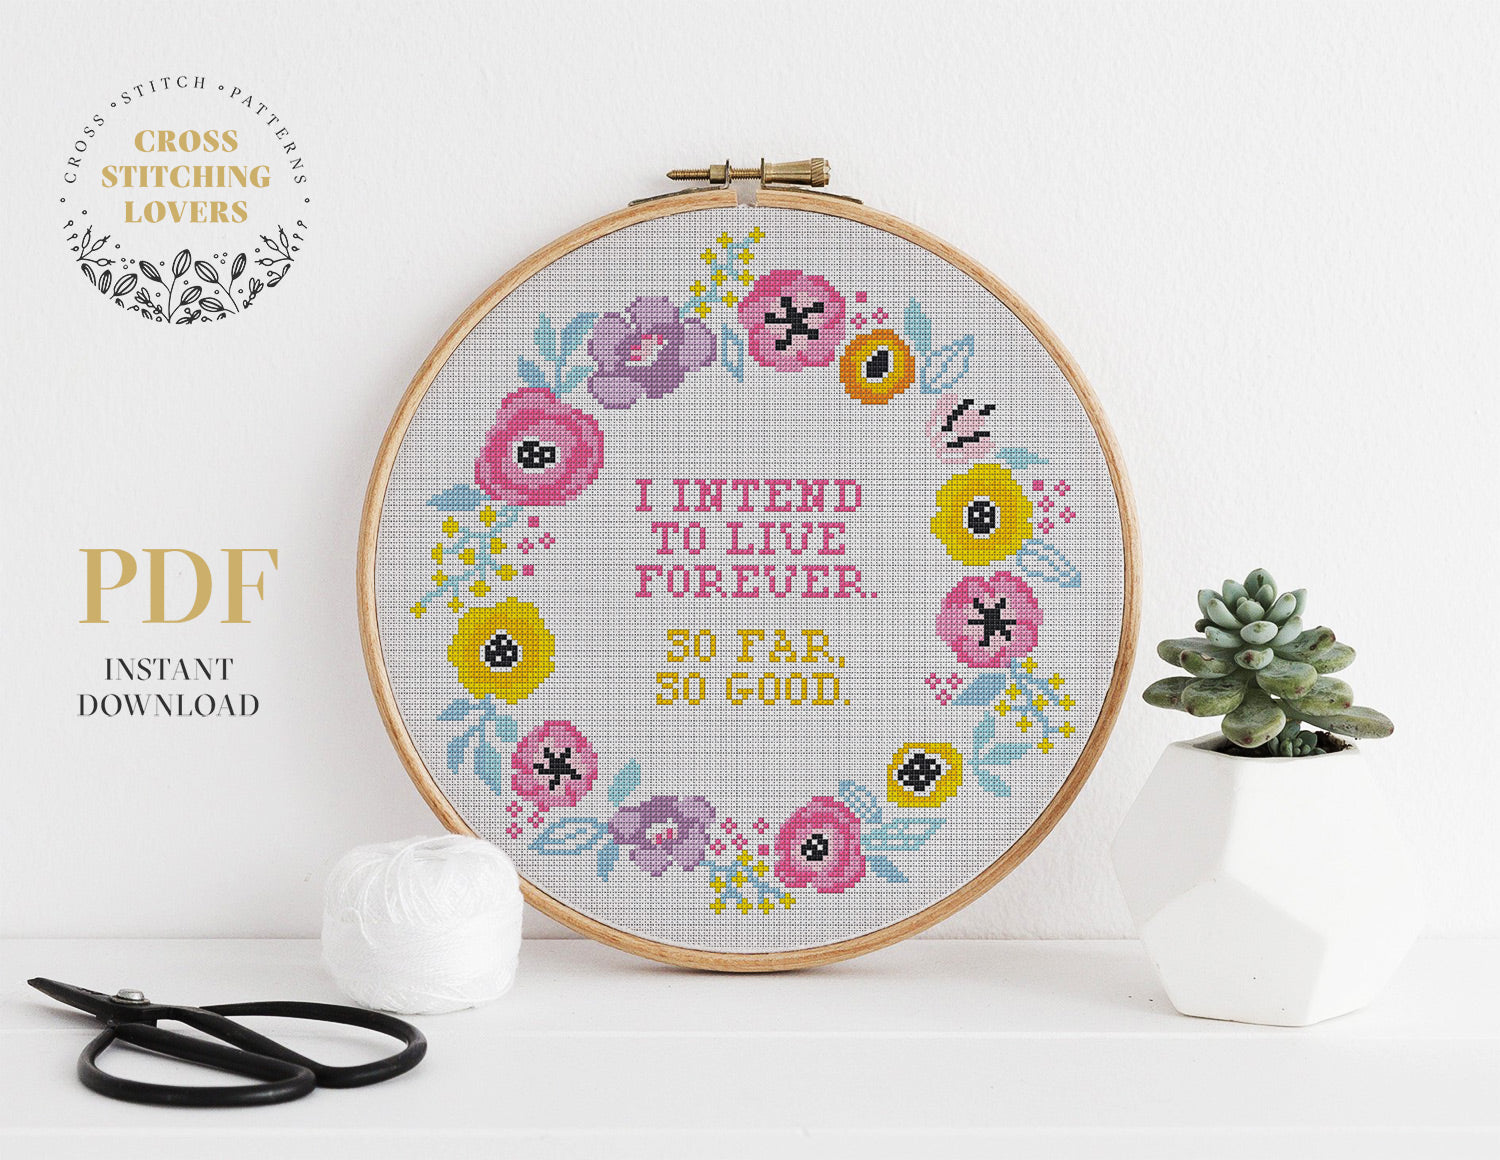 I INTEND TO LIVE FOREVER - Cross stitch pattern